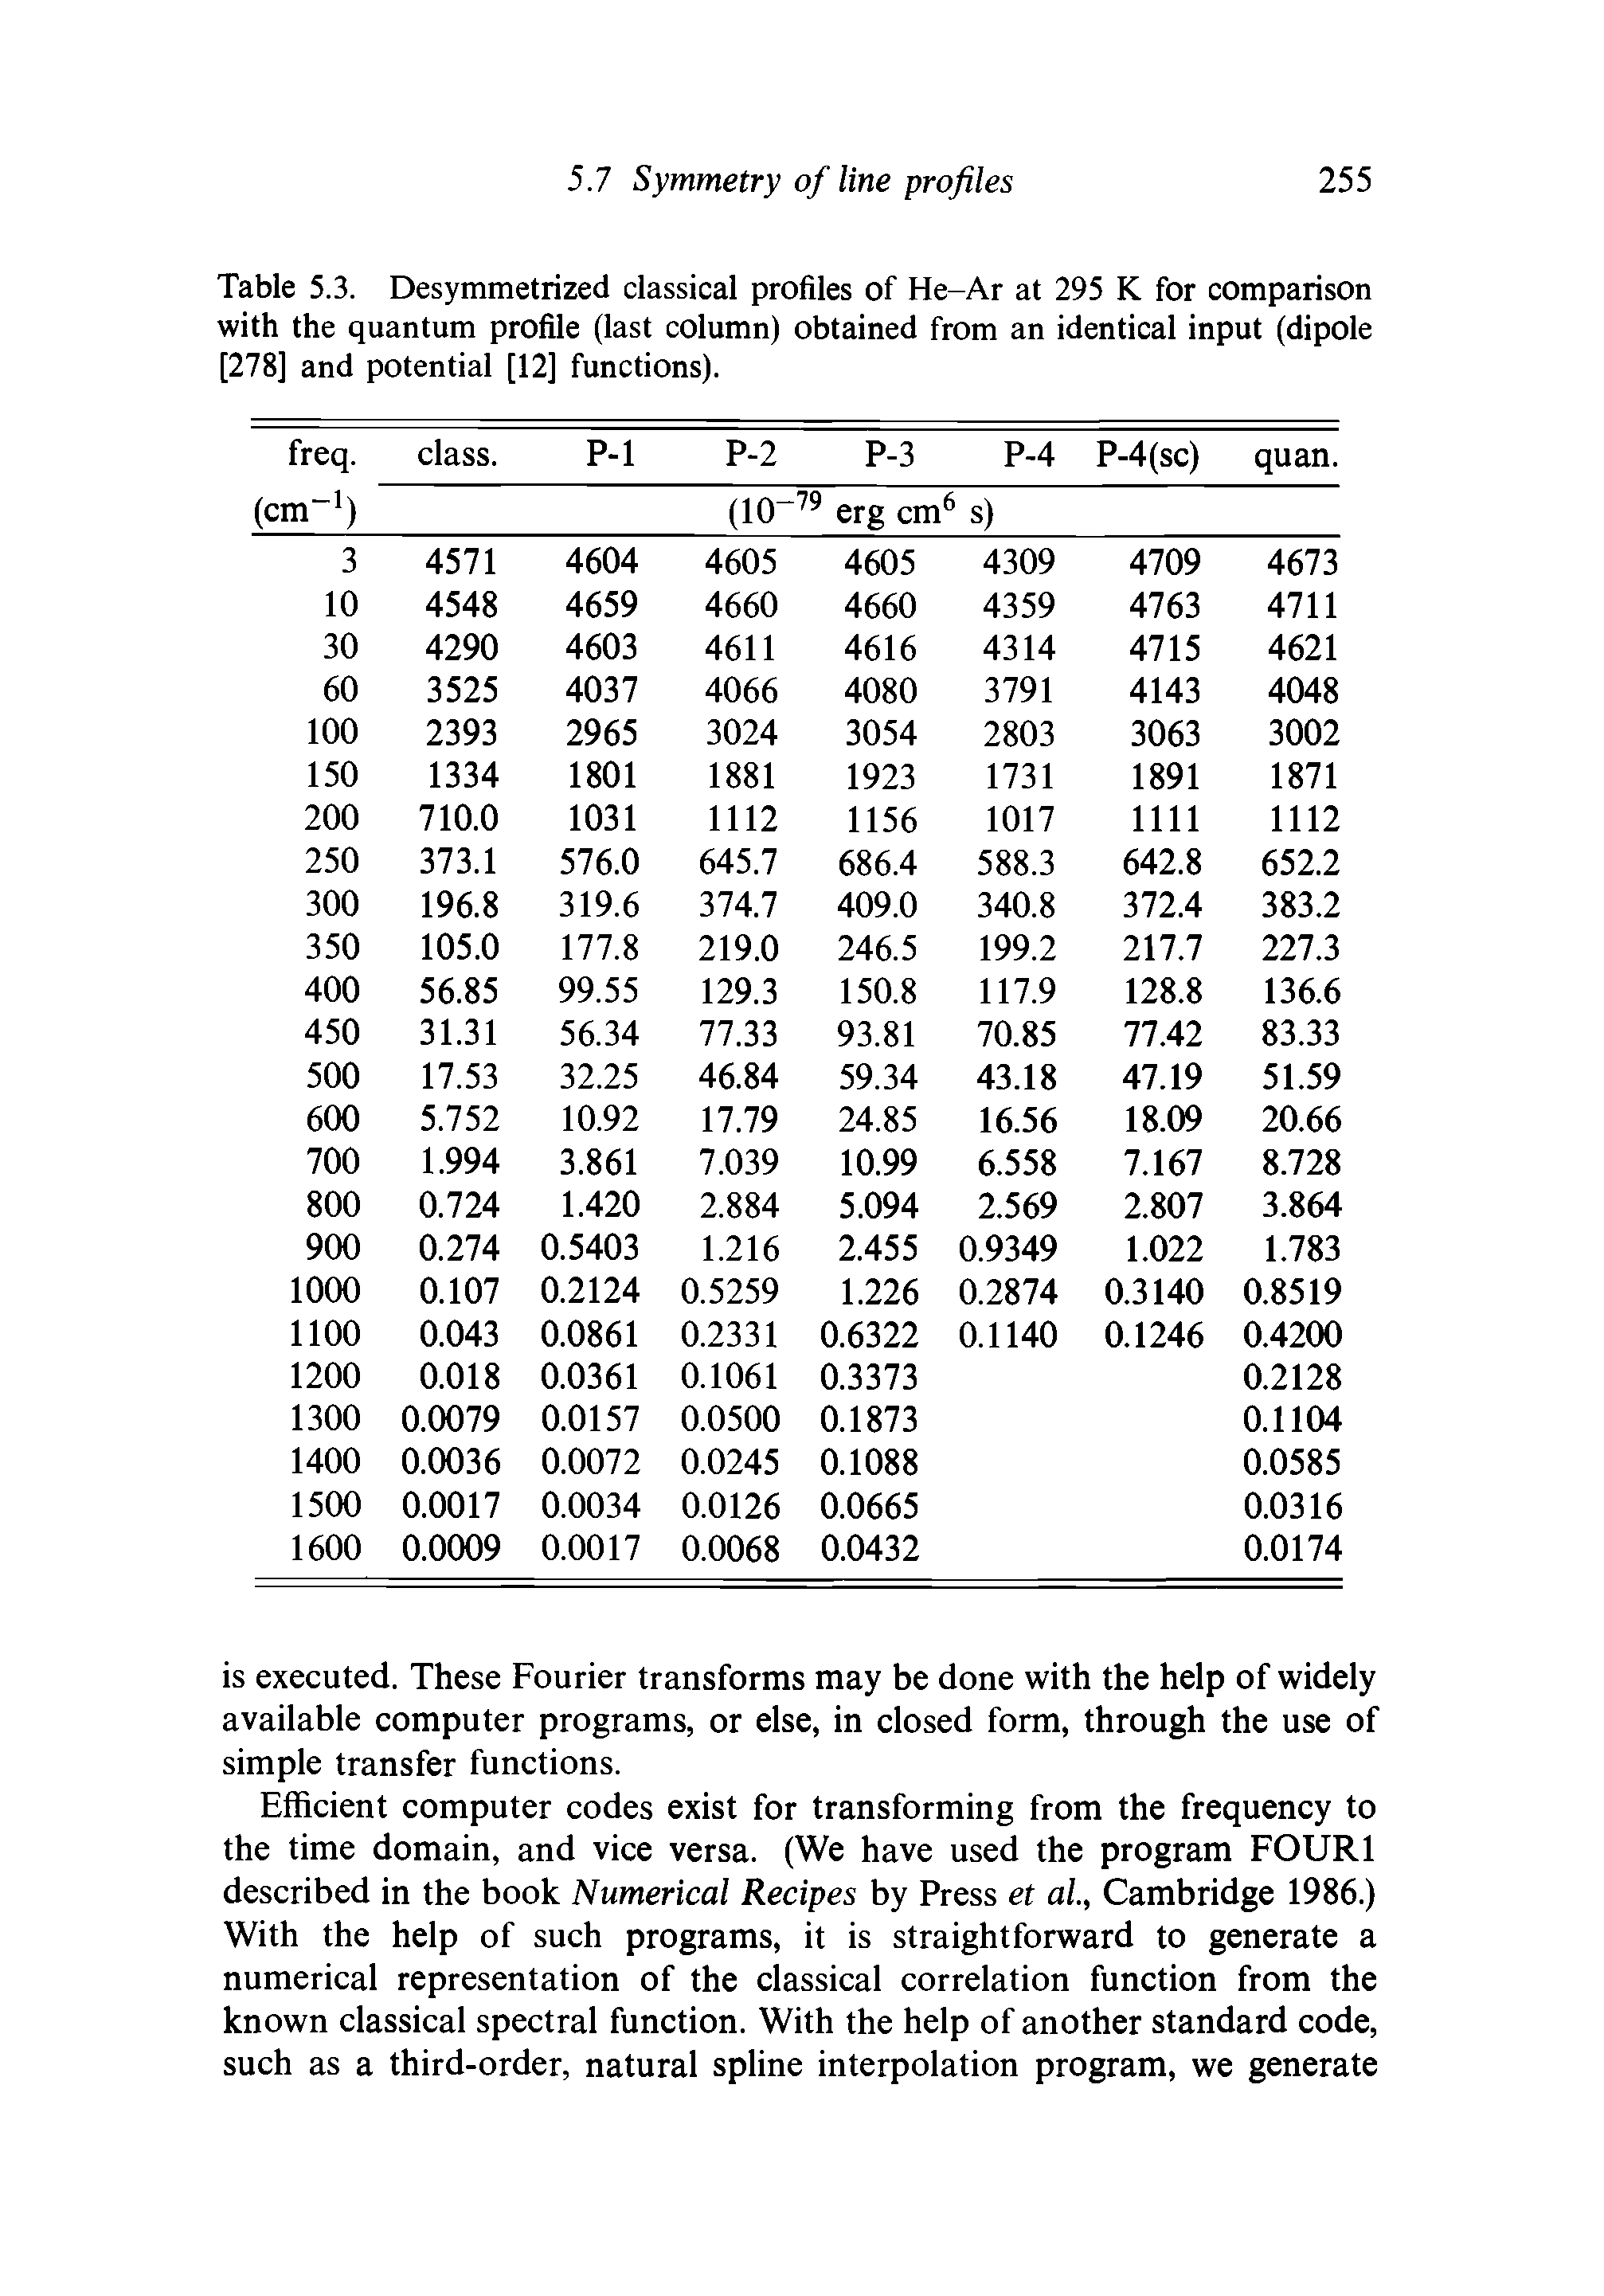 Table 5.3. Desymmetrized classical profiles of He-Ar at 295 K for comparison with the quantum profile (last column) obtained from an identical input (dipole [278] and potential [12] functions).